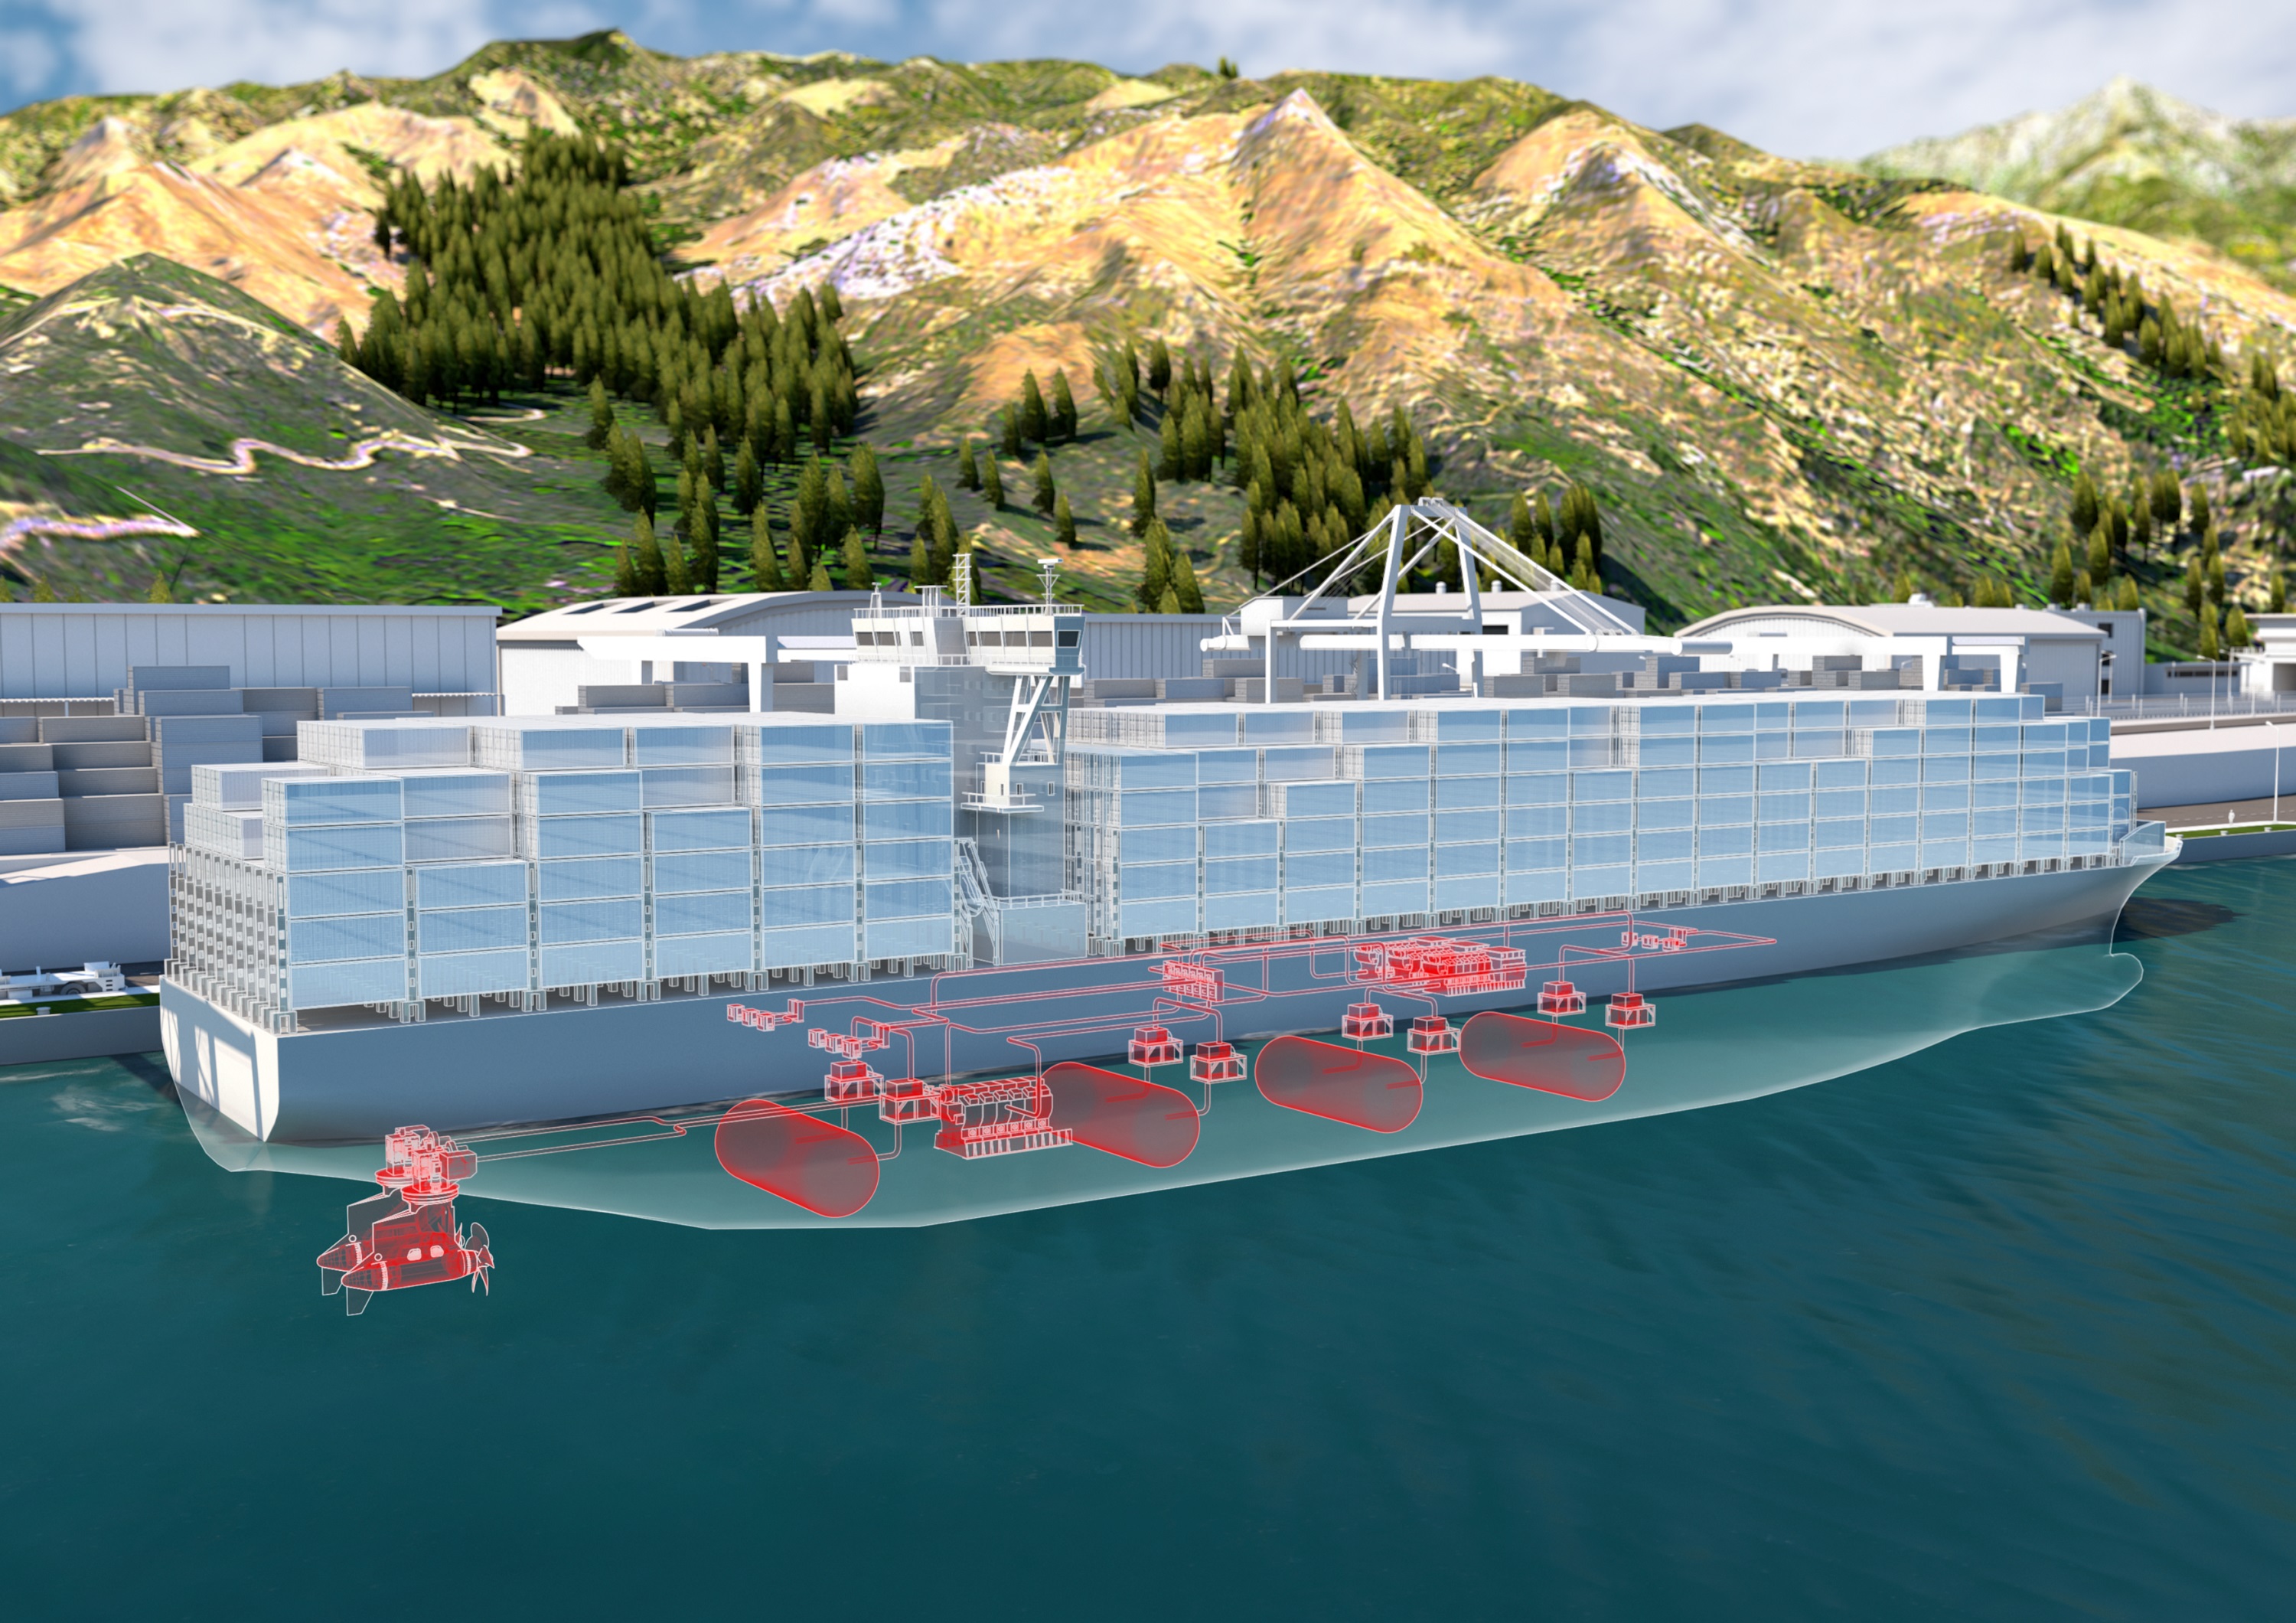 Concept_illustration_of_a_large_vessel_powered_by_fuel_cells__Image_credit_ABB.jpg